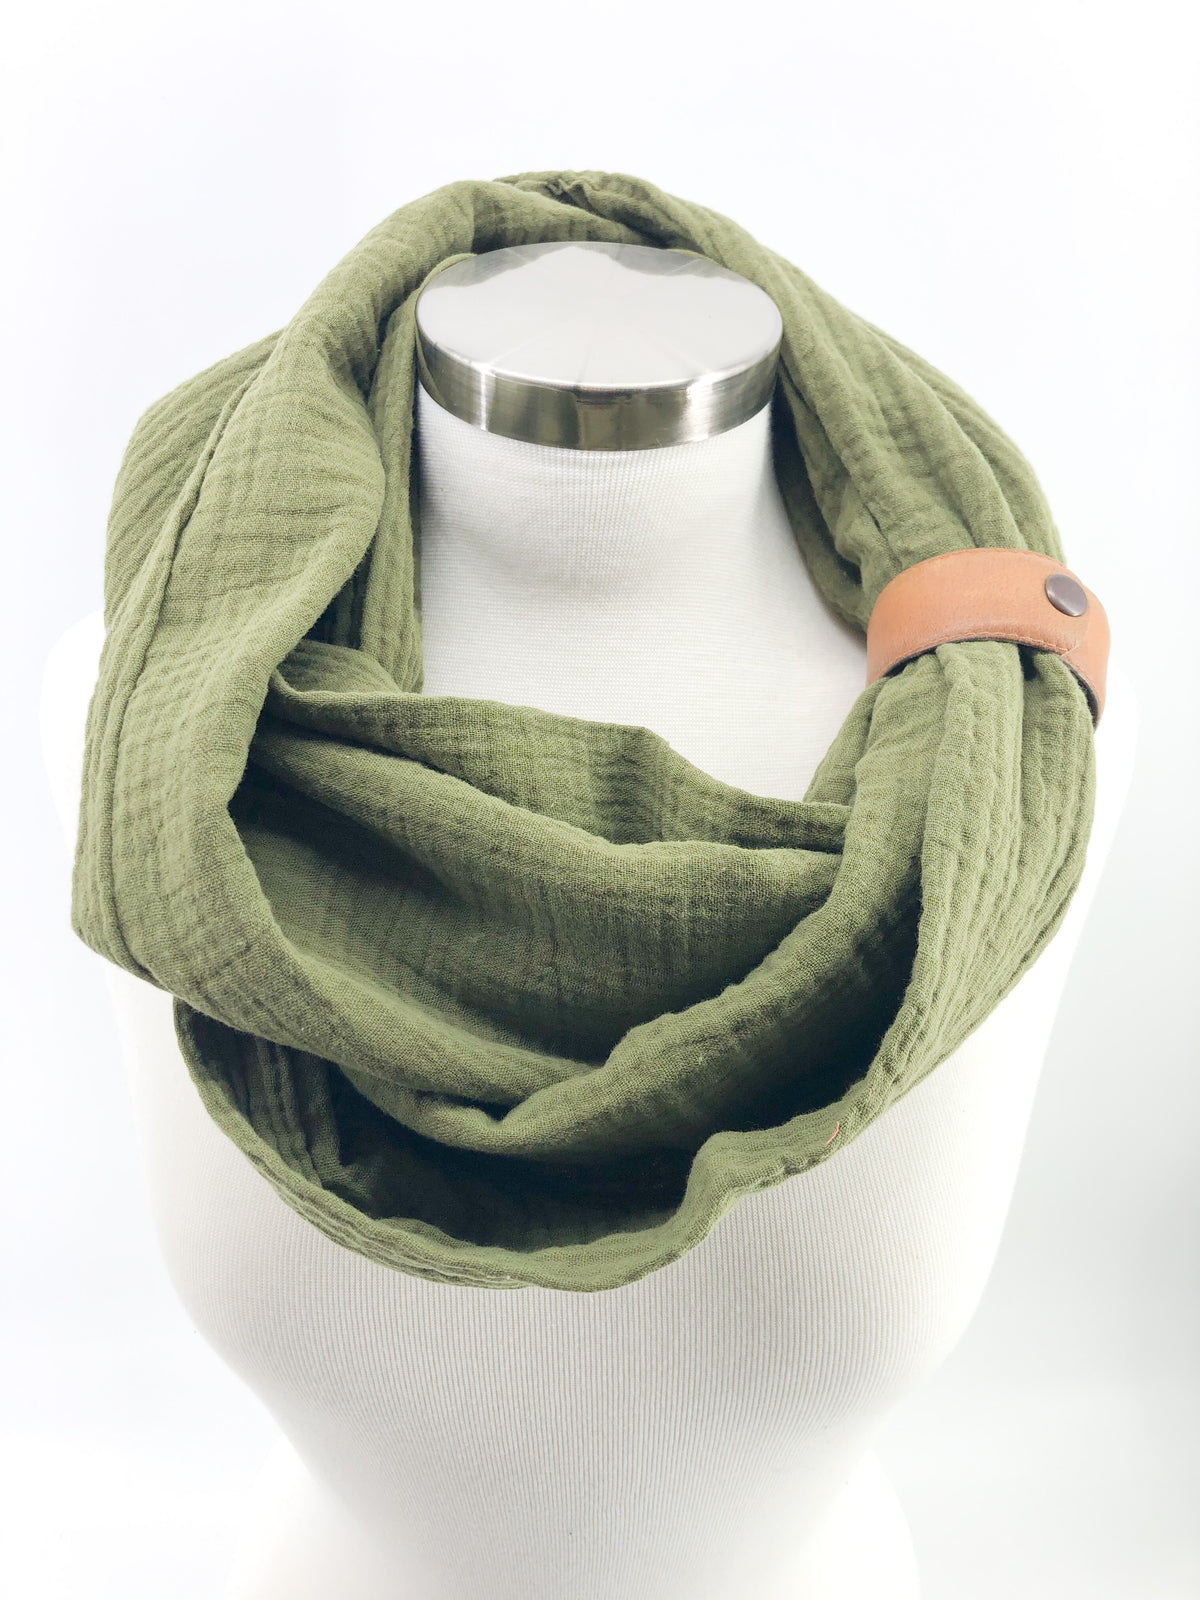 Olive Gauze Eternity Scarf with a Leather Cuff